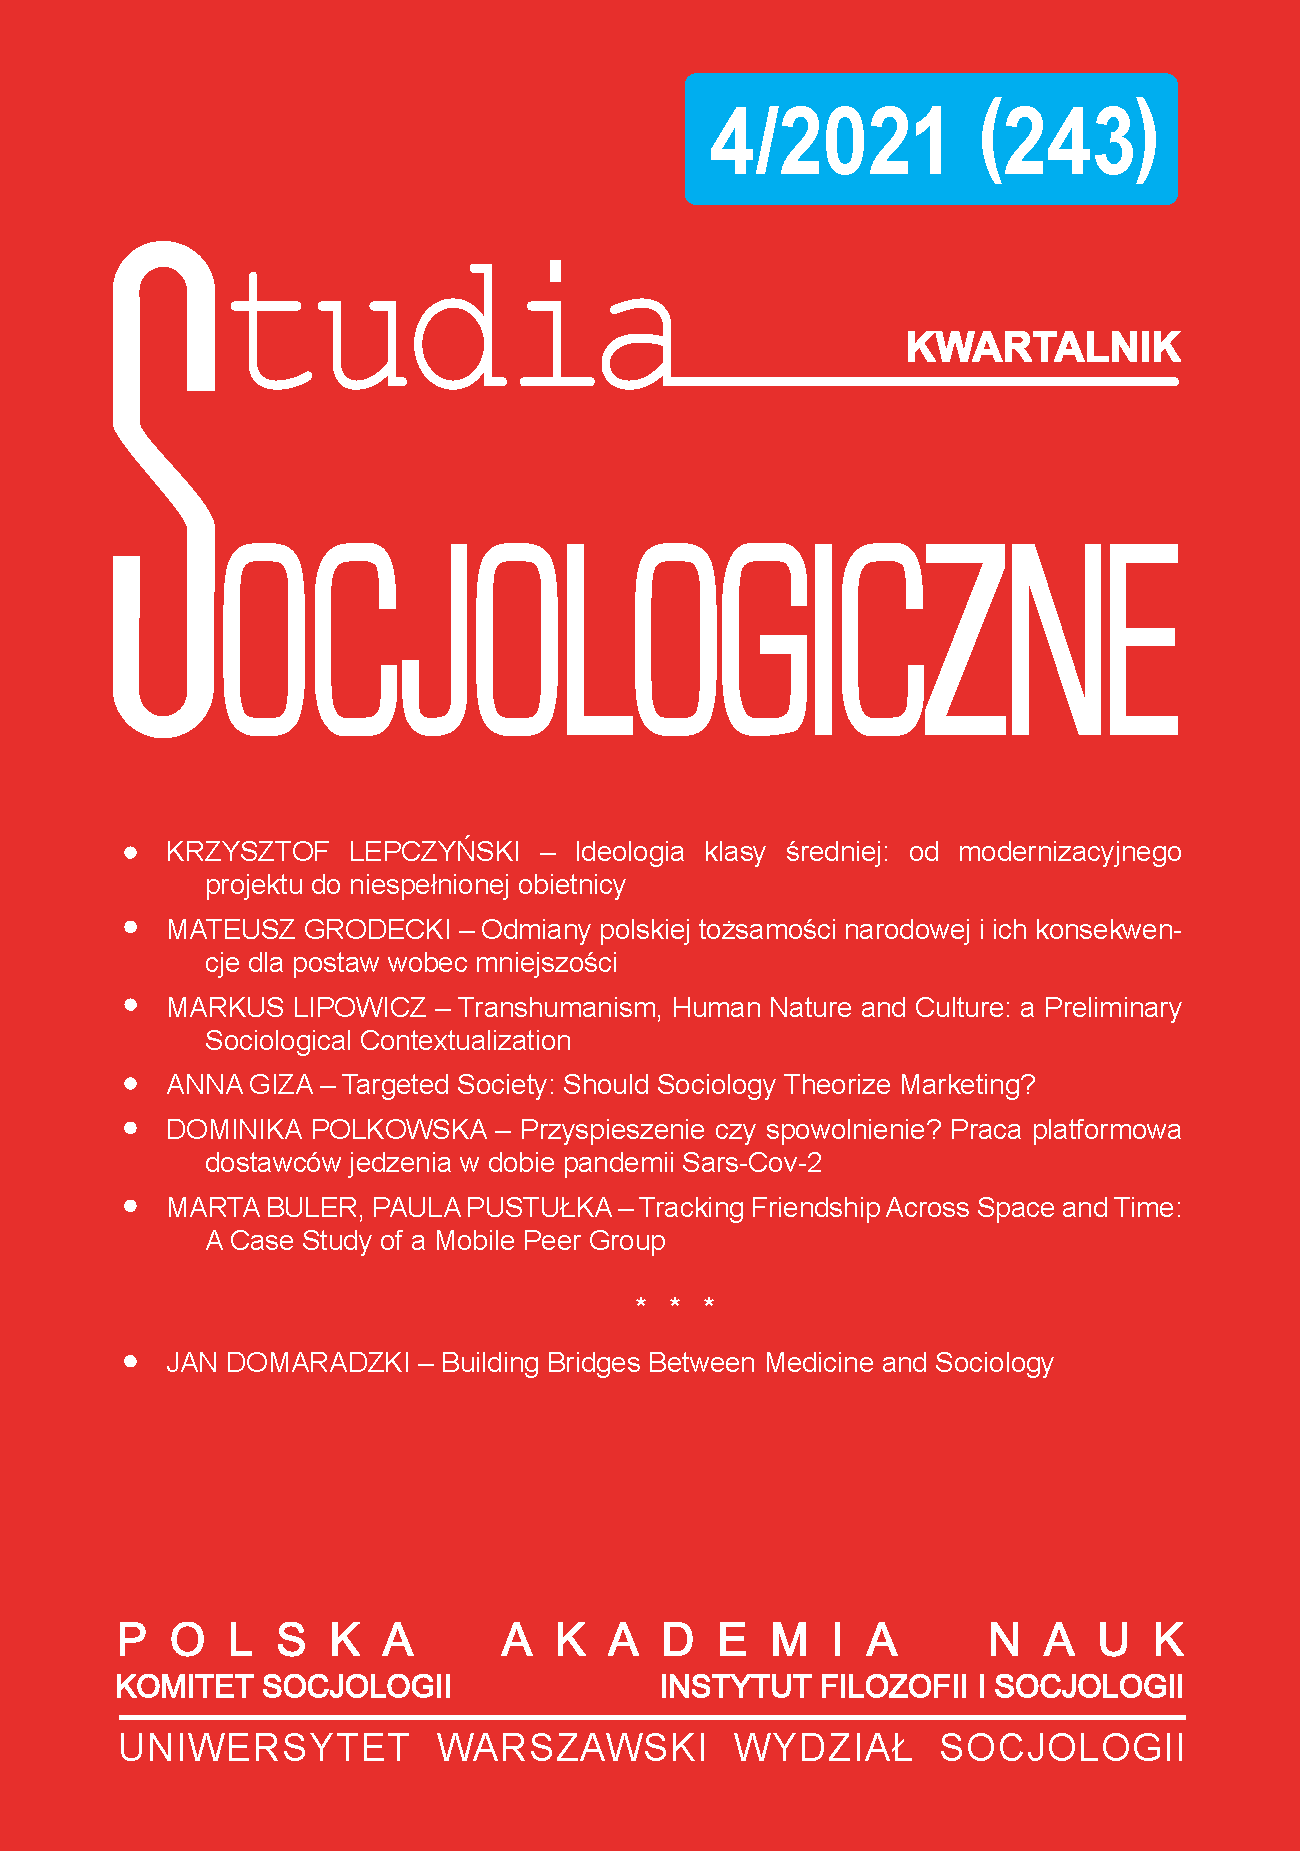 Variations of Polish national identities and their consequences for attitudes towards minorities Cover Image